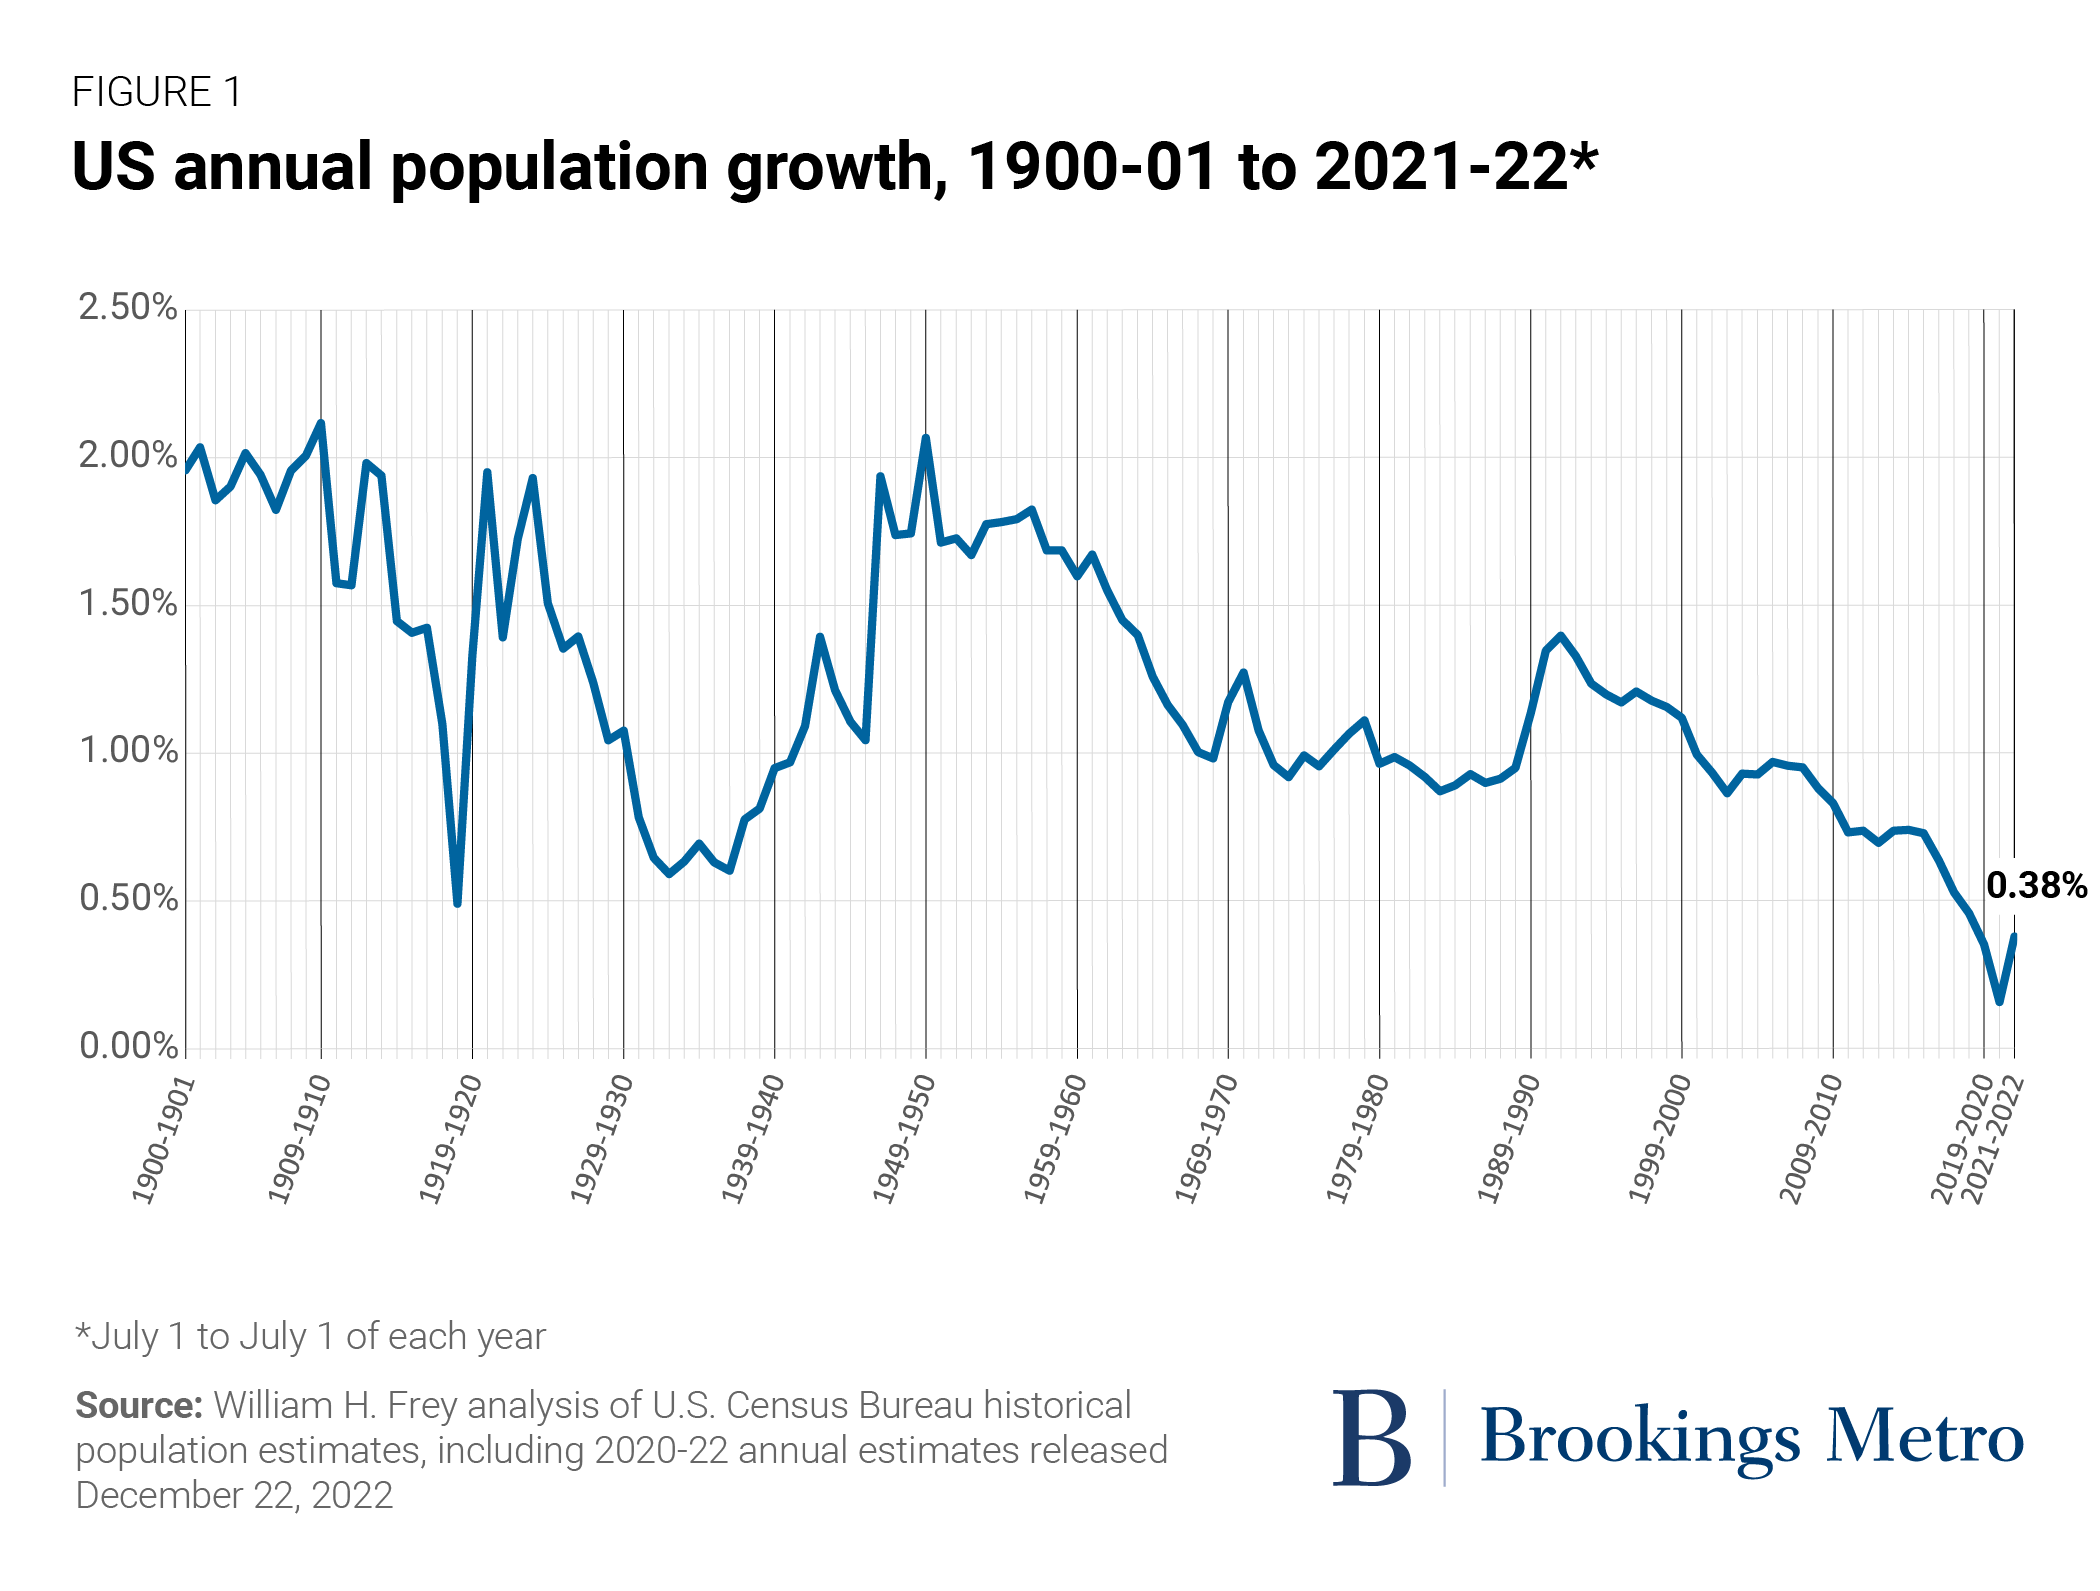 New census estimates show a tepid rise in U.S. population buoyed by immigration